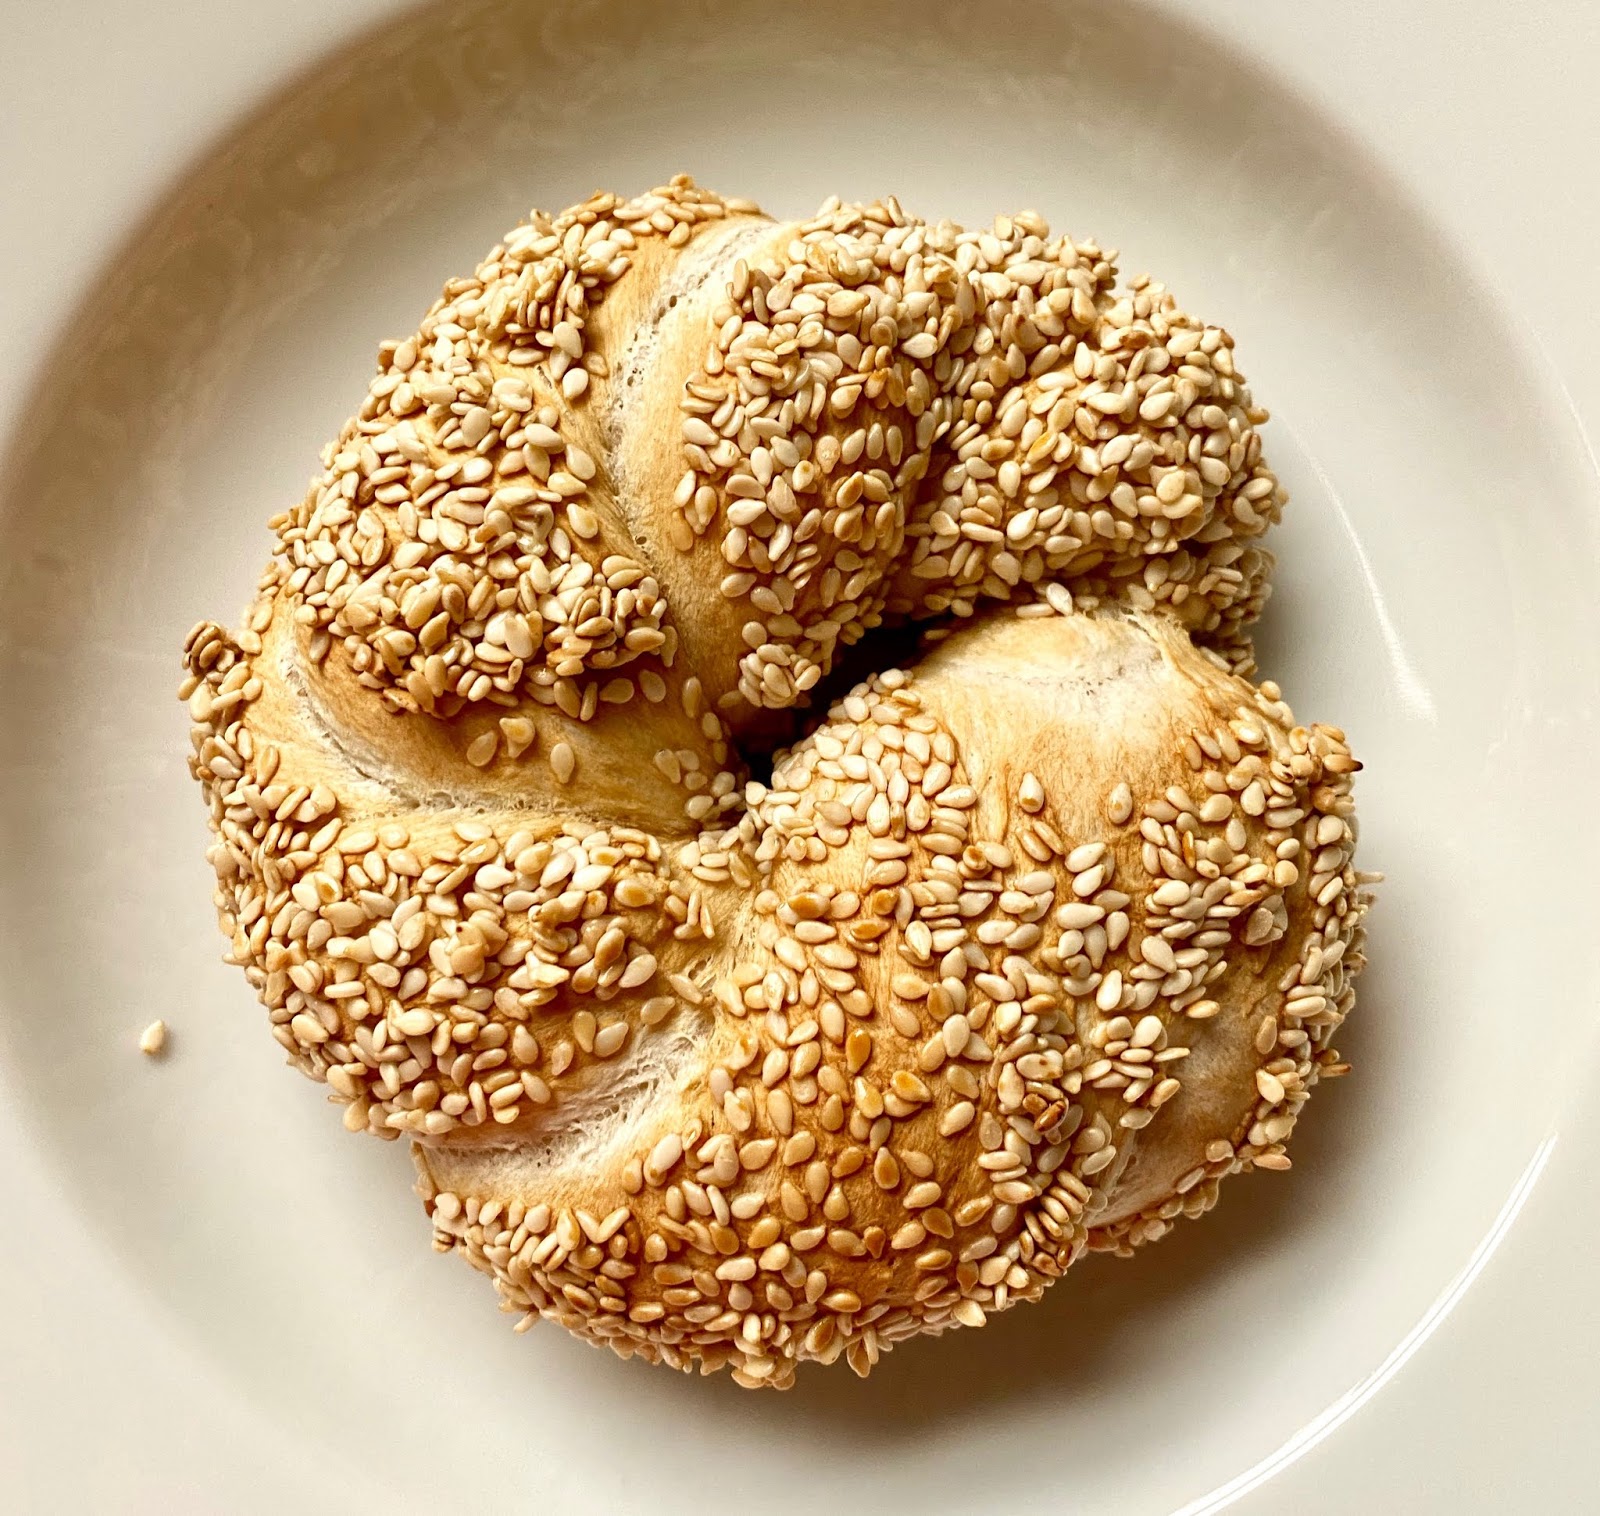 What's Round and Coated in Sesame Seeds but Not a Sesame Bagel?: Simit ( Sesame-Encrusted Turkish Bread Rings)